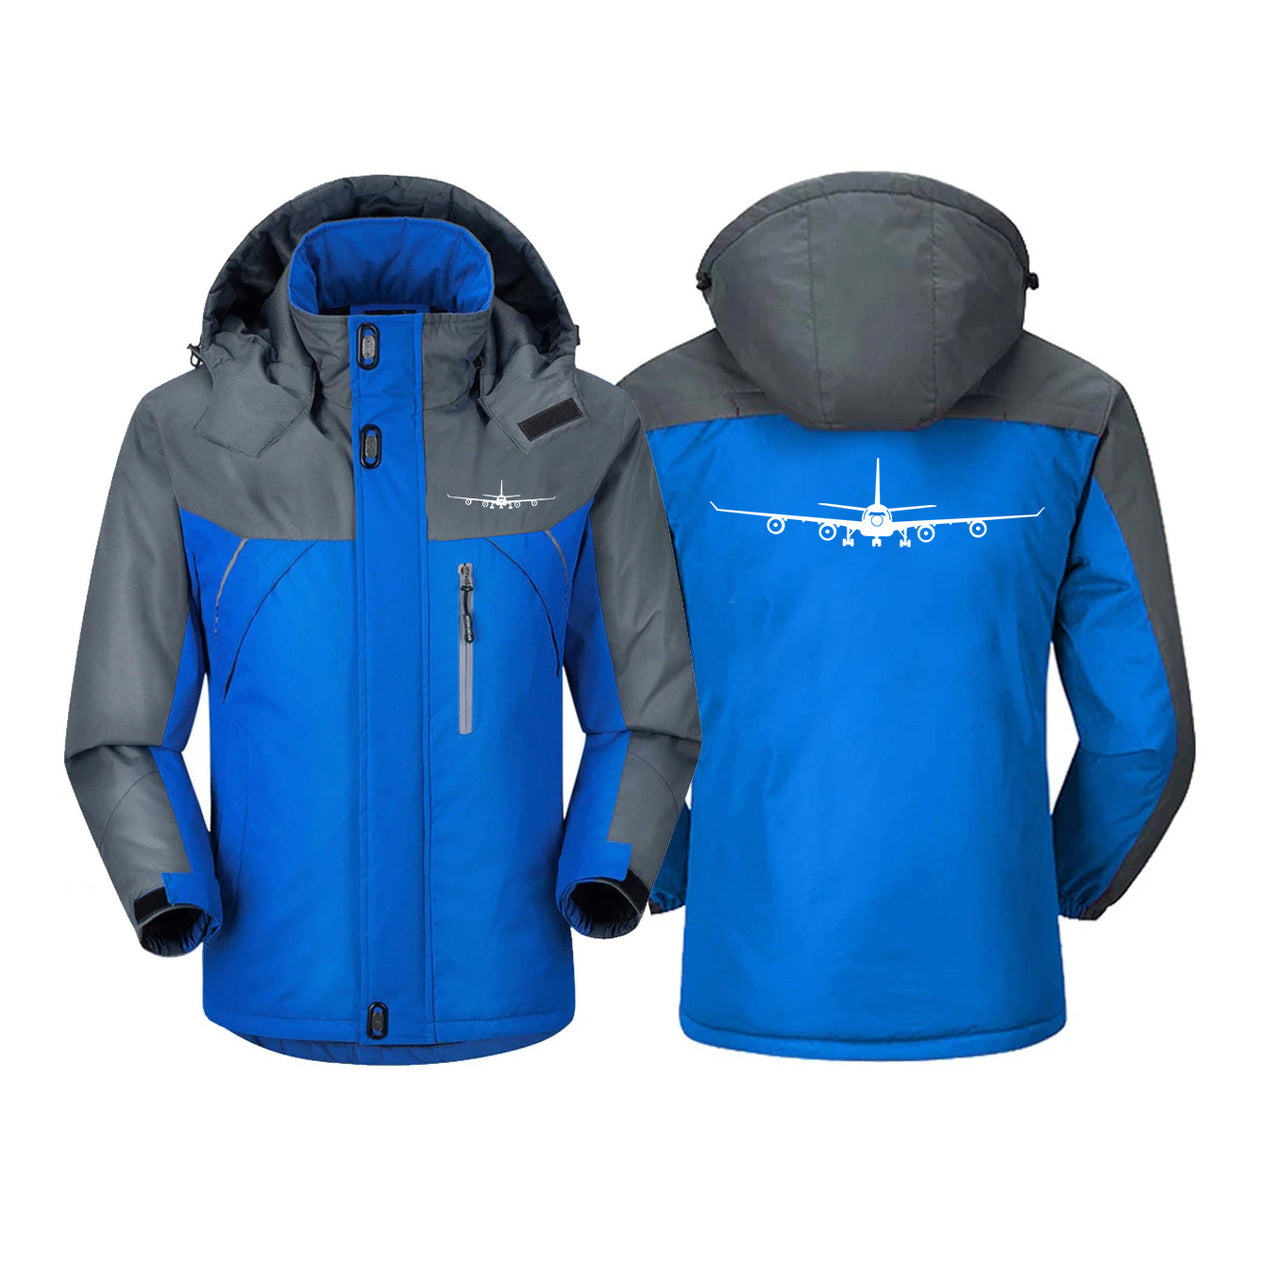 Airbus A340 Silhouette Designed Thick Winter Jackets